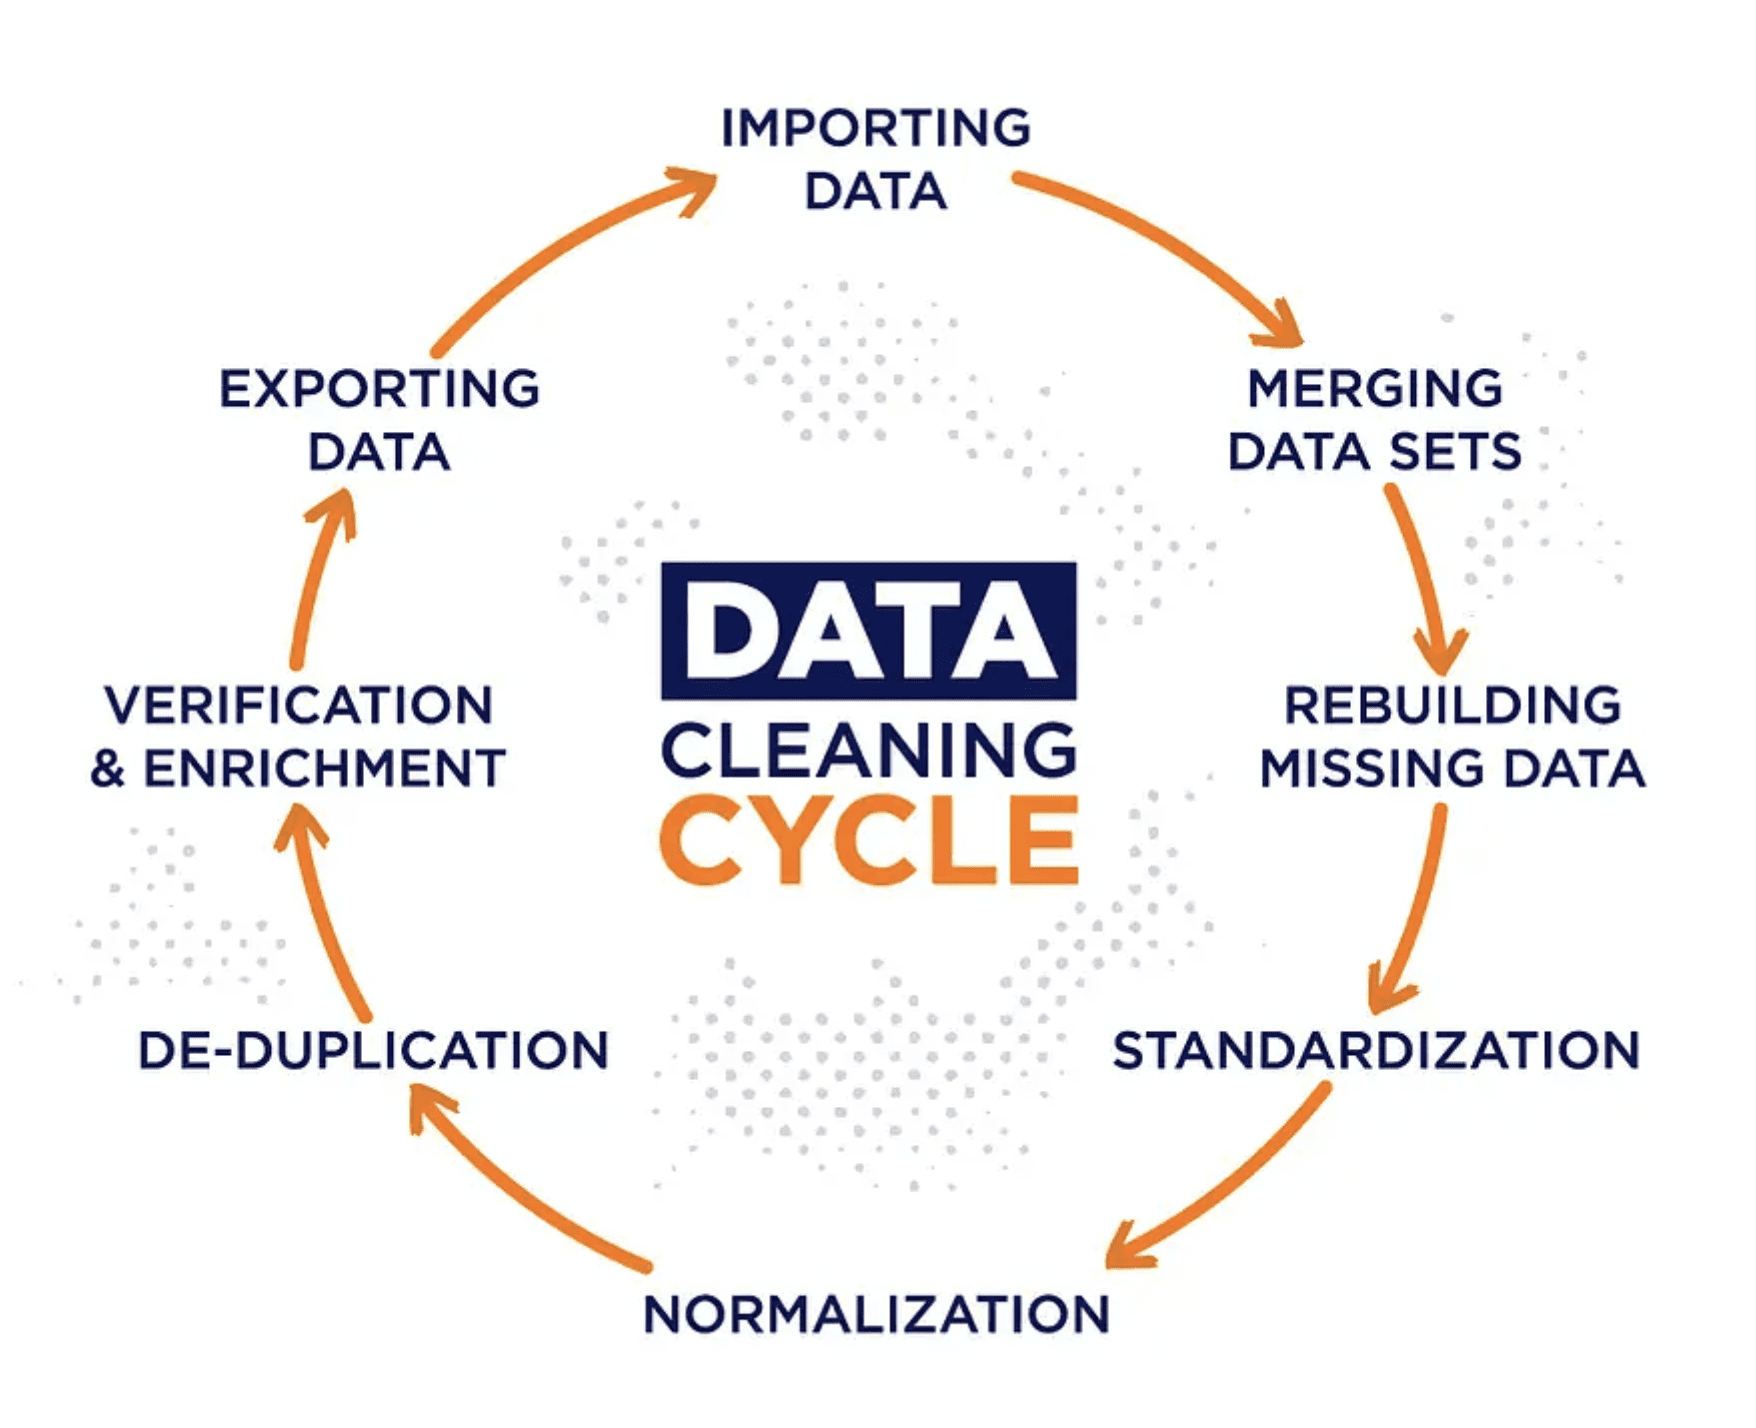 Steps of data cleansing cycle.